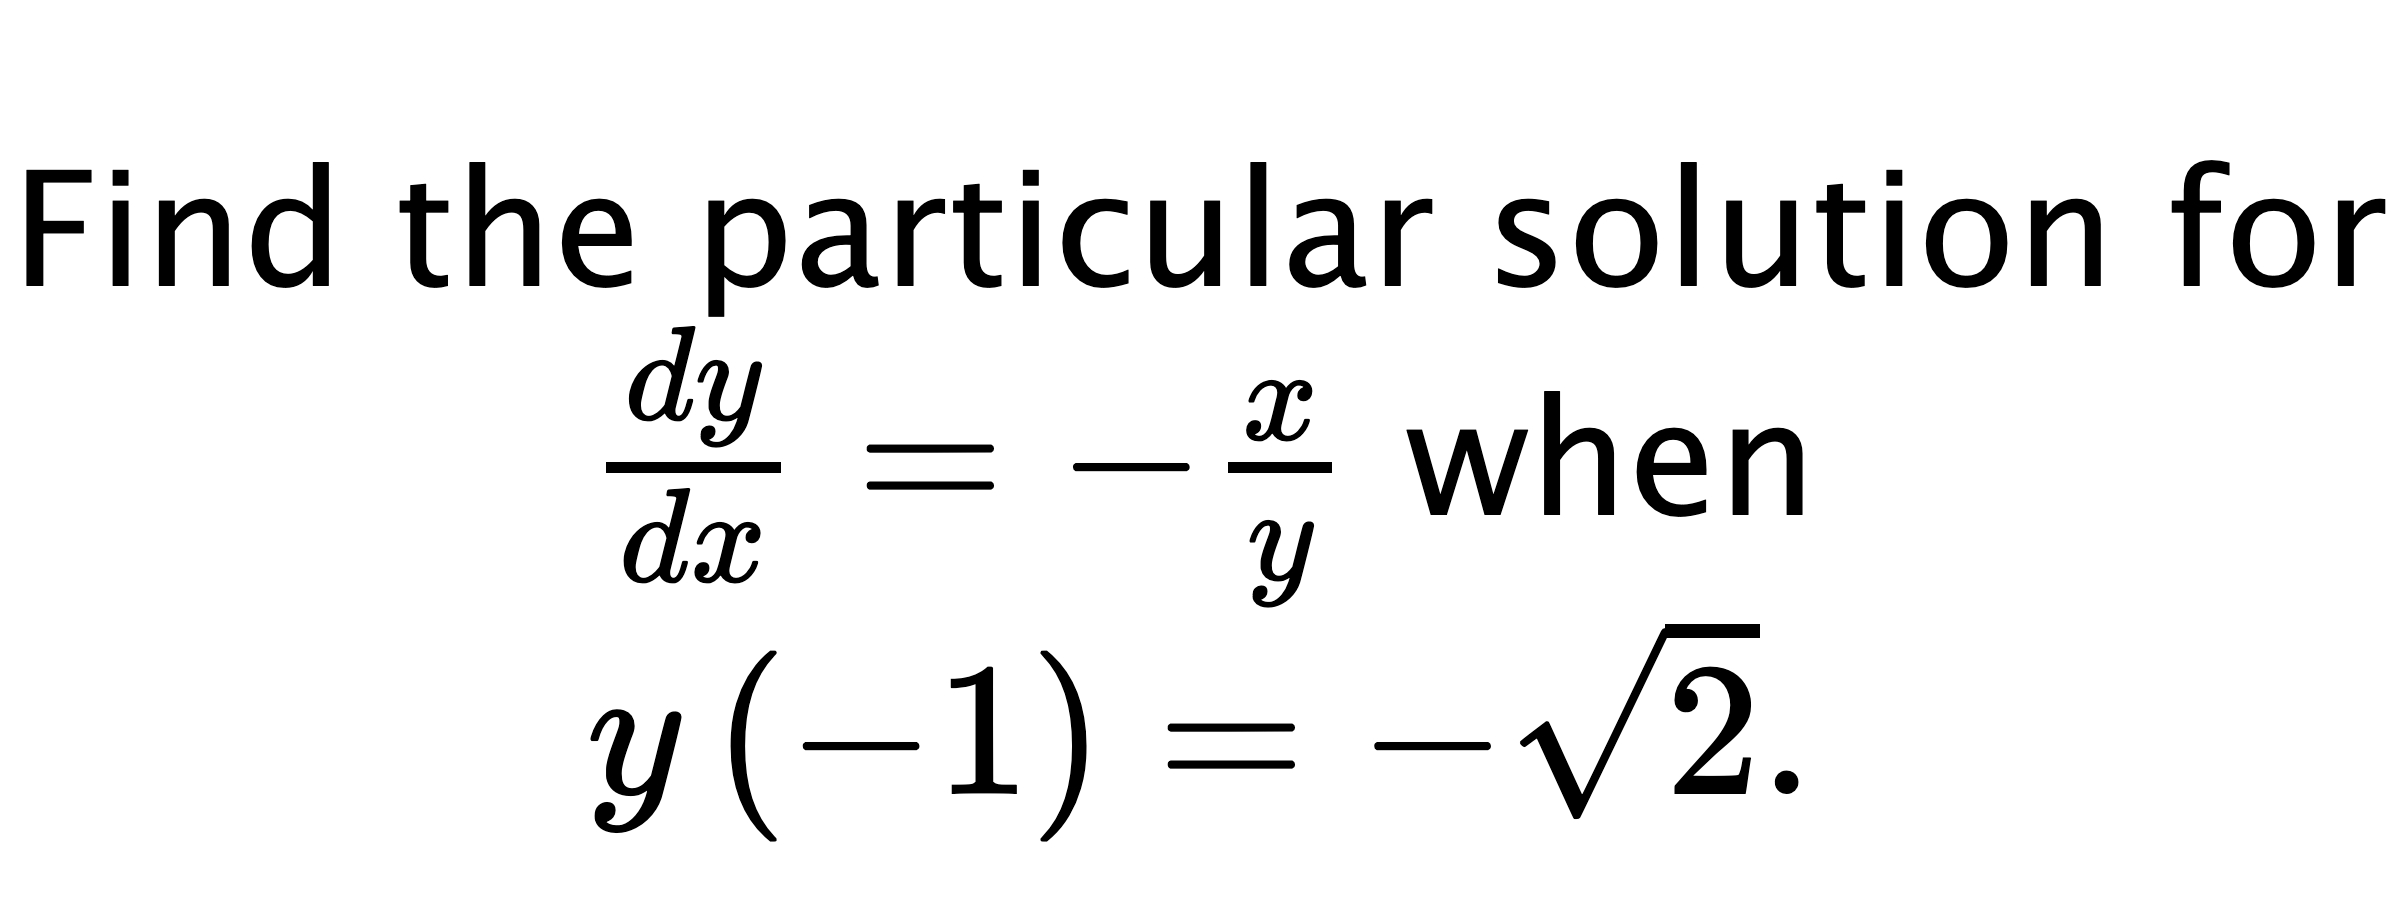  Find the particular solution for $ \frac{dy}{dx}=-\frac{x}{y} $ when $ y\left( -1 \right)=-\sqrt{2}. $